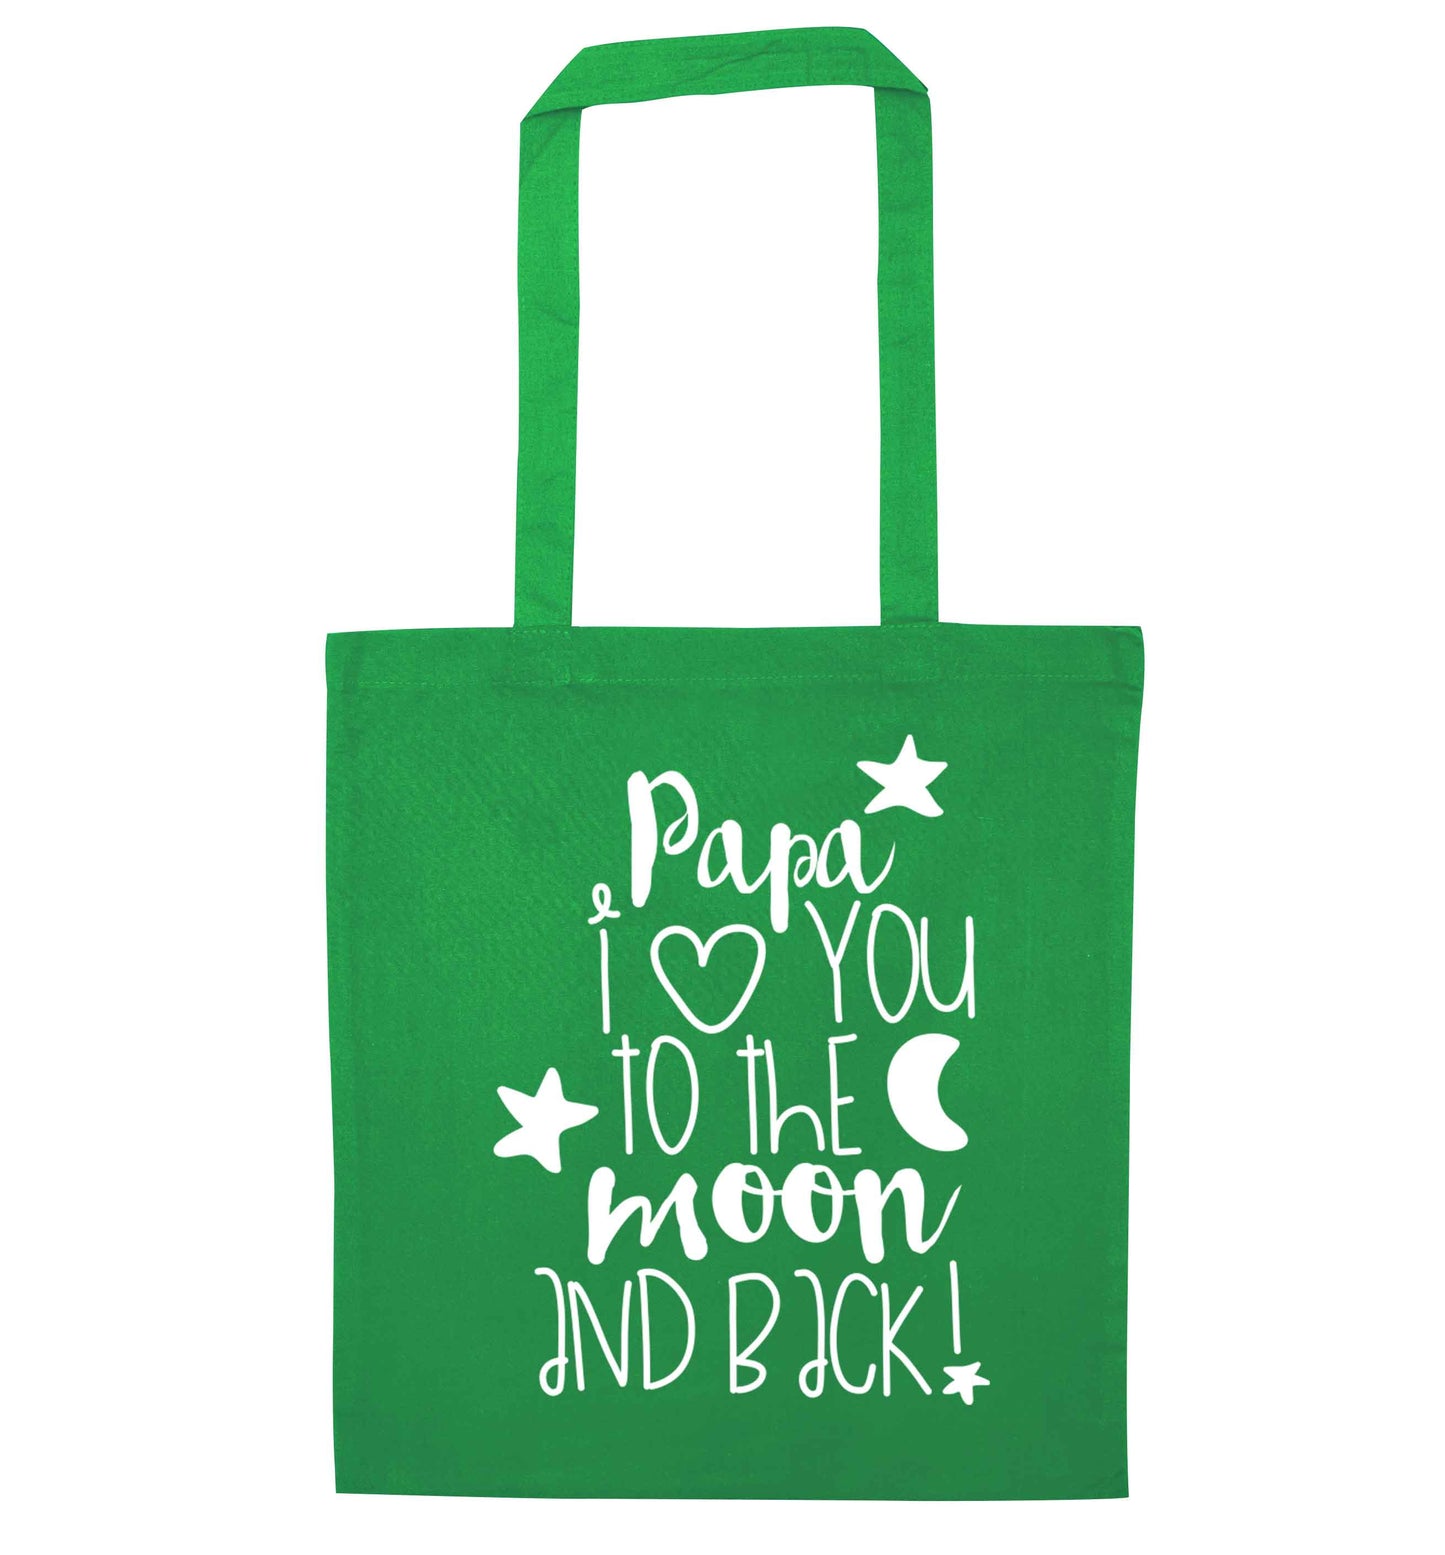 Papa I love you to the moon and back green tote bag